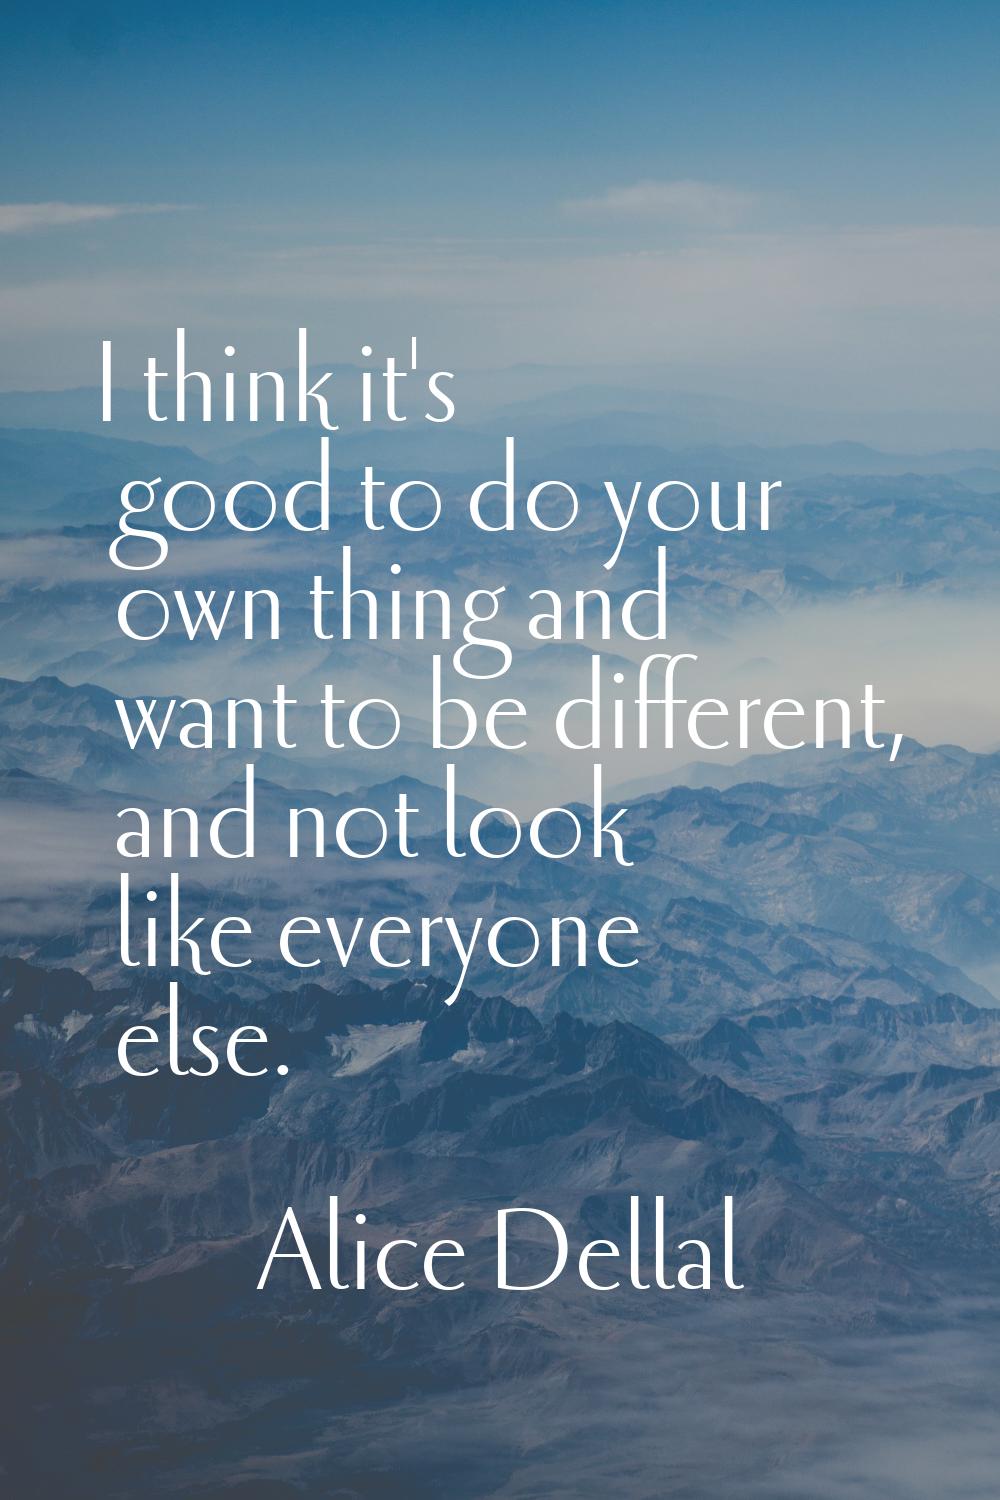 I think it's good to do your own thing and want to be different, and not look like everyone else.